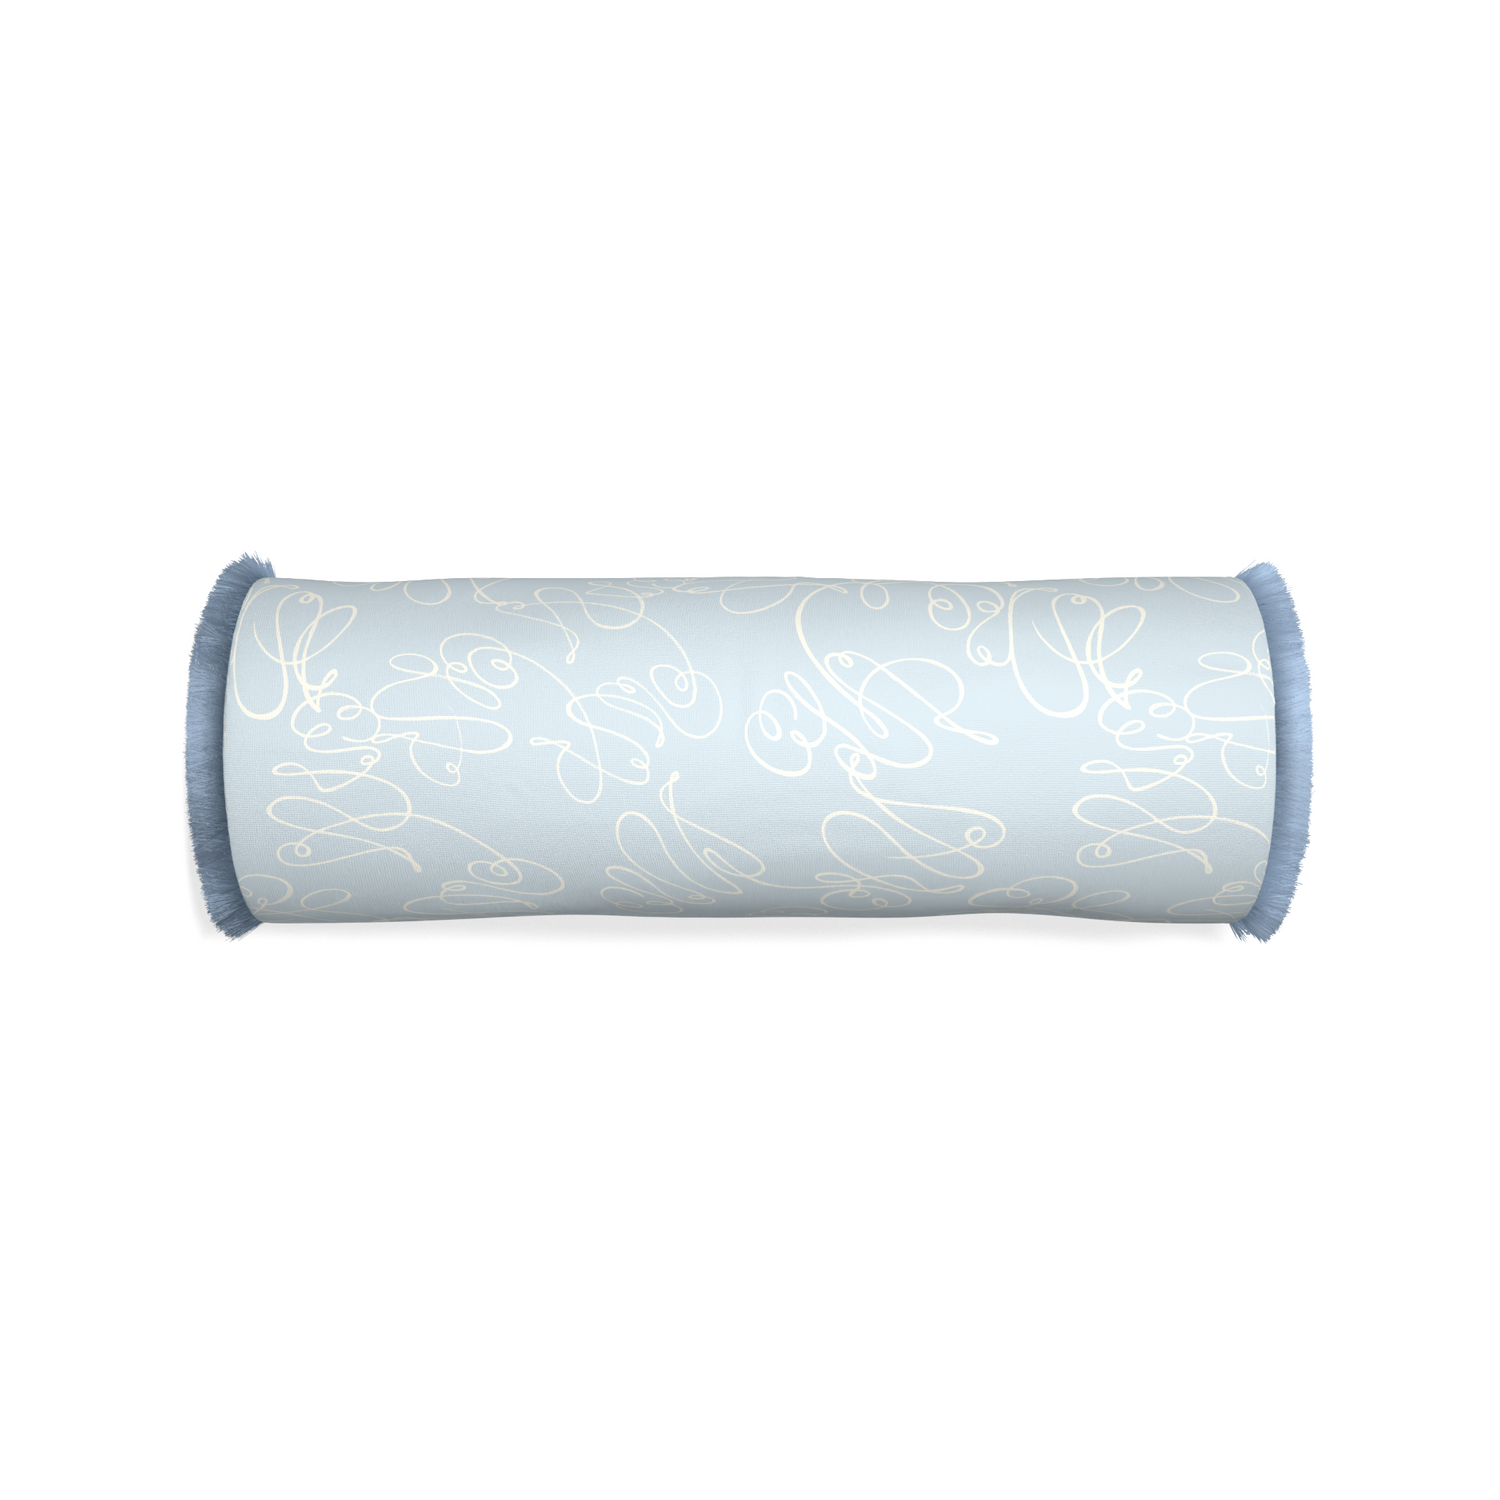 Bolster mirabella custom powder blue abstractpillow with sky fringe on white background